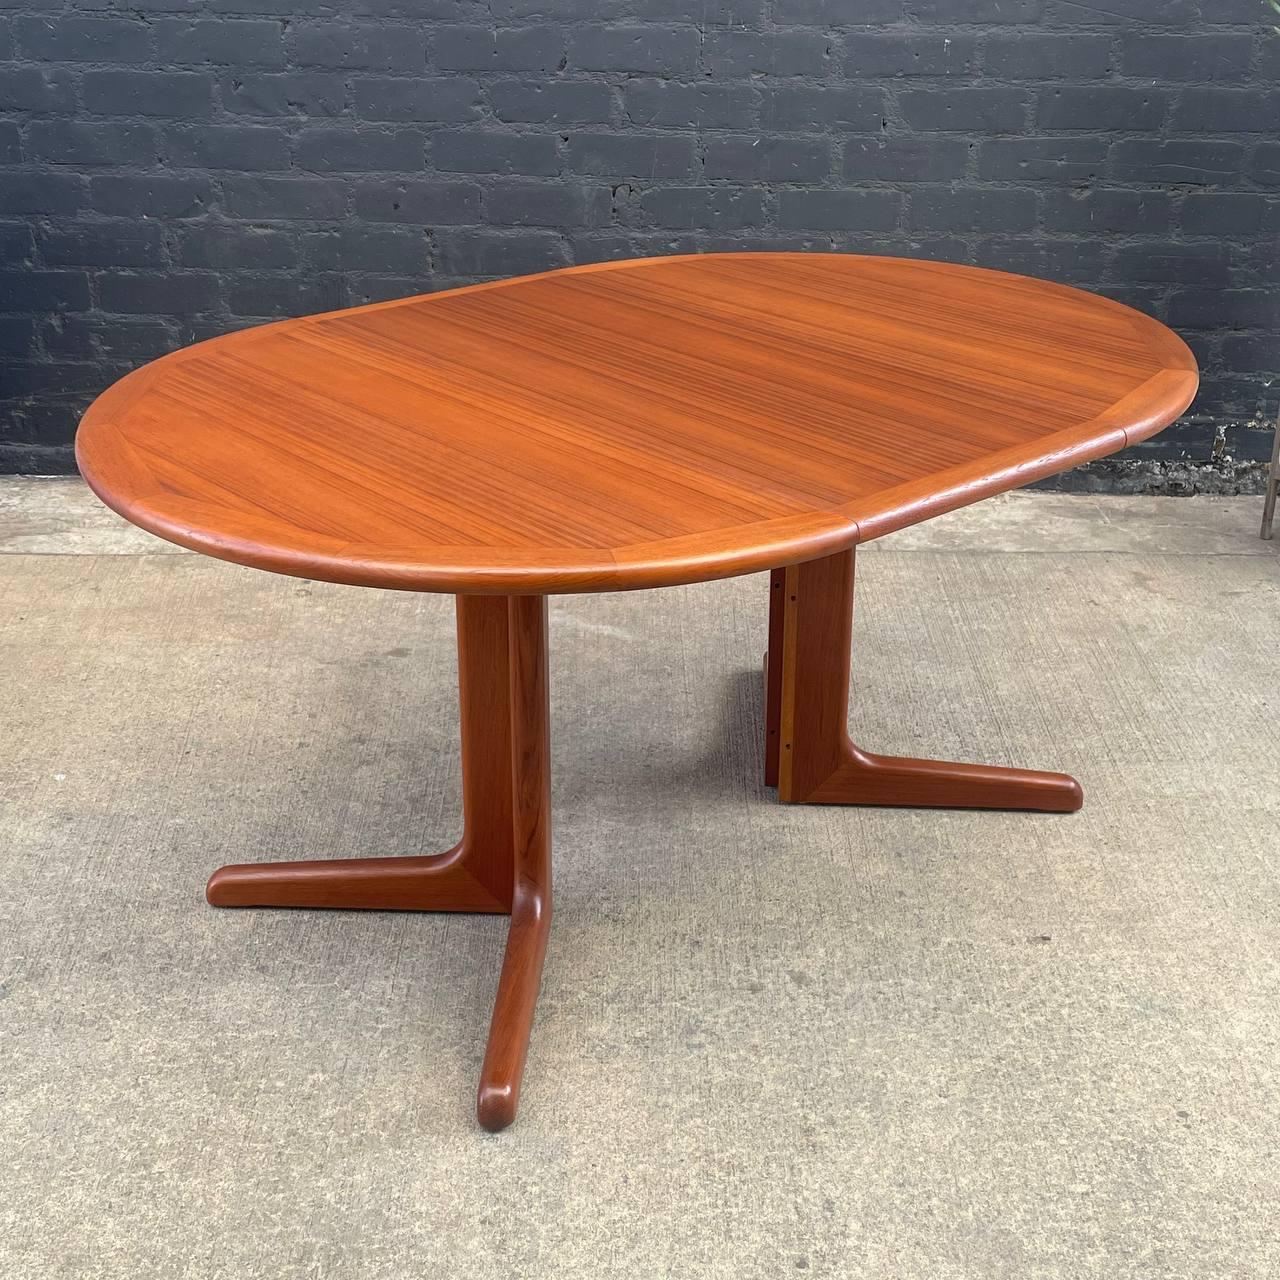 Newly Refinished - Mid-Century Danish Modern Expanding Teak Round Dining Table

With over 15 years of experience, our workshop has followed a careful process of restoration, showcasing our passion and creativity for vintage designs that can